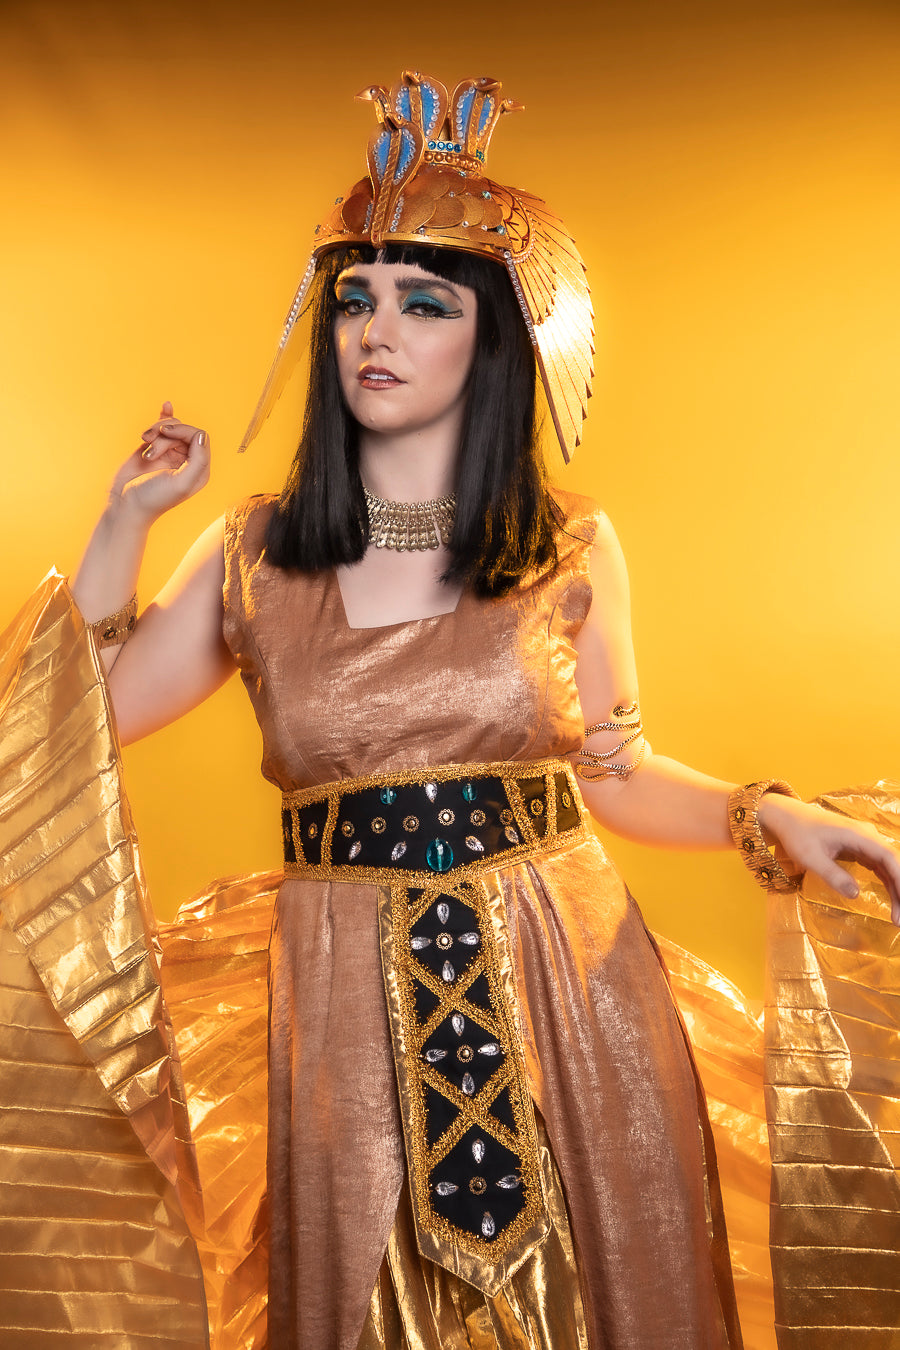 Cleopatra Egyptian Costume Hire or Cosplay, plus Makeup and Photography. Proudly by and available at, Little Shop of Horrors Costumery 6/1 Watt Rd Mornington & Melbourne